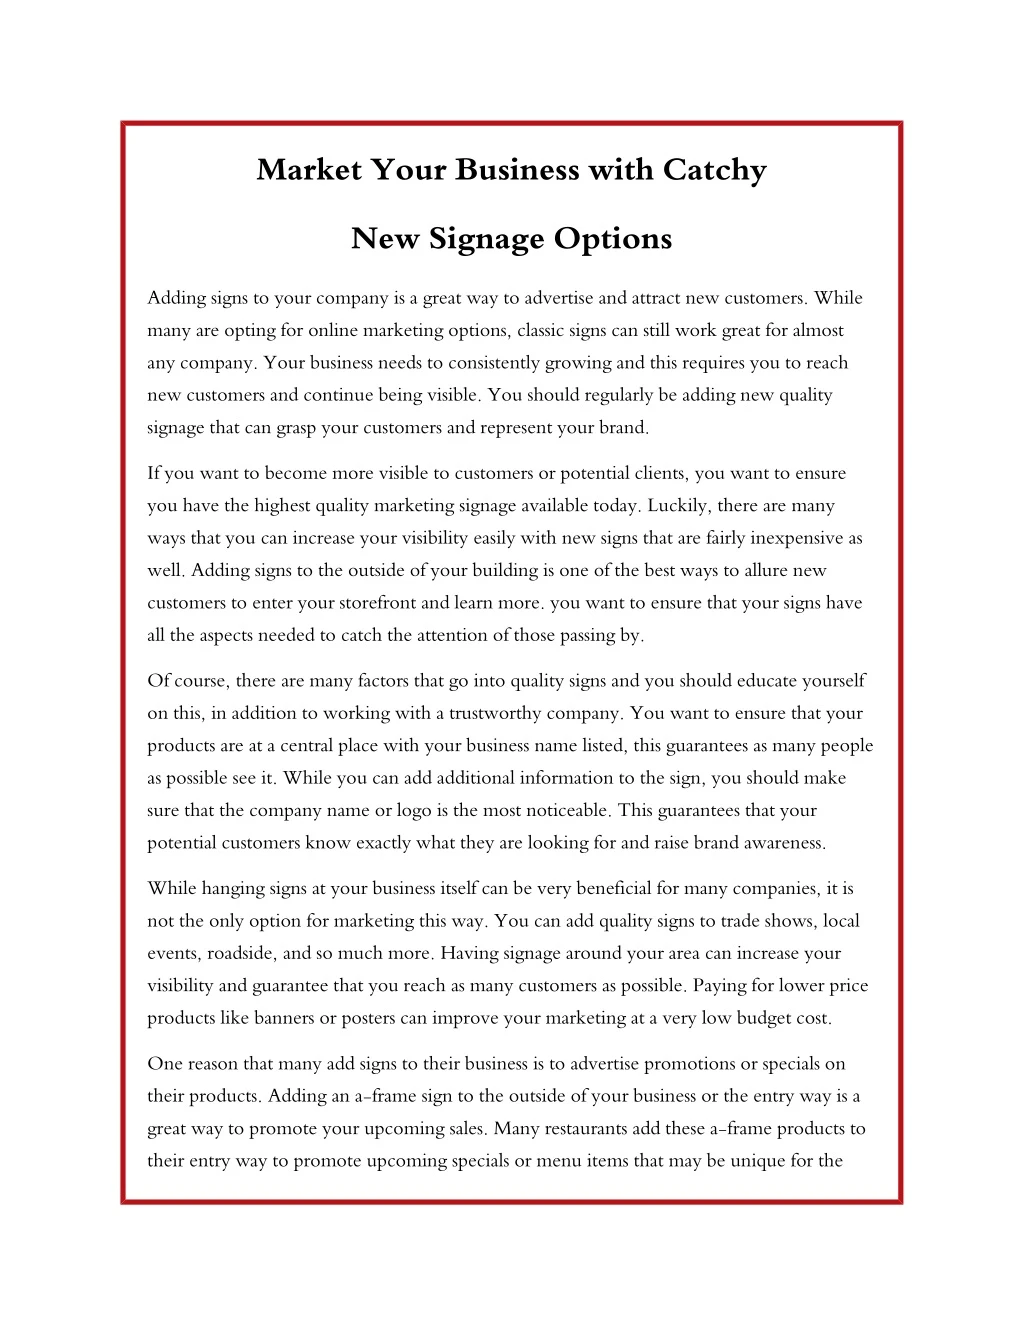 market your business with catchy